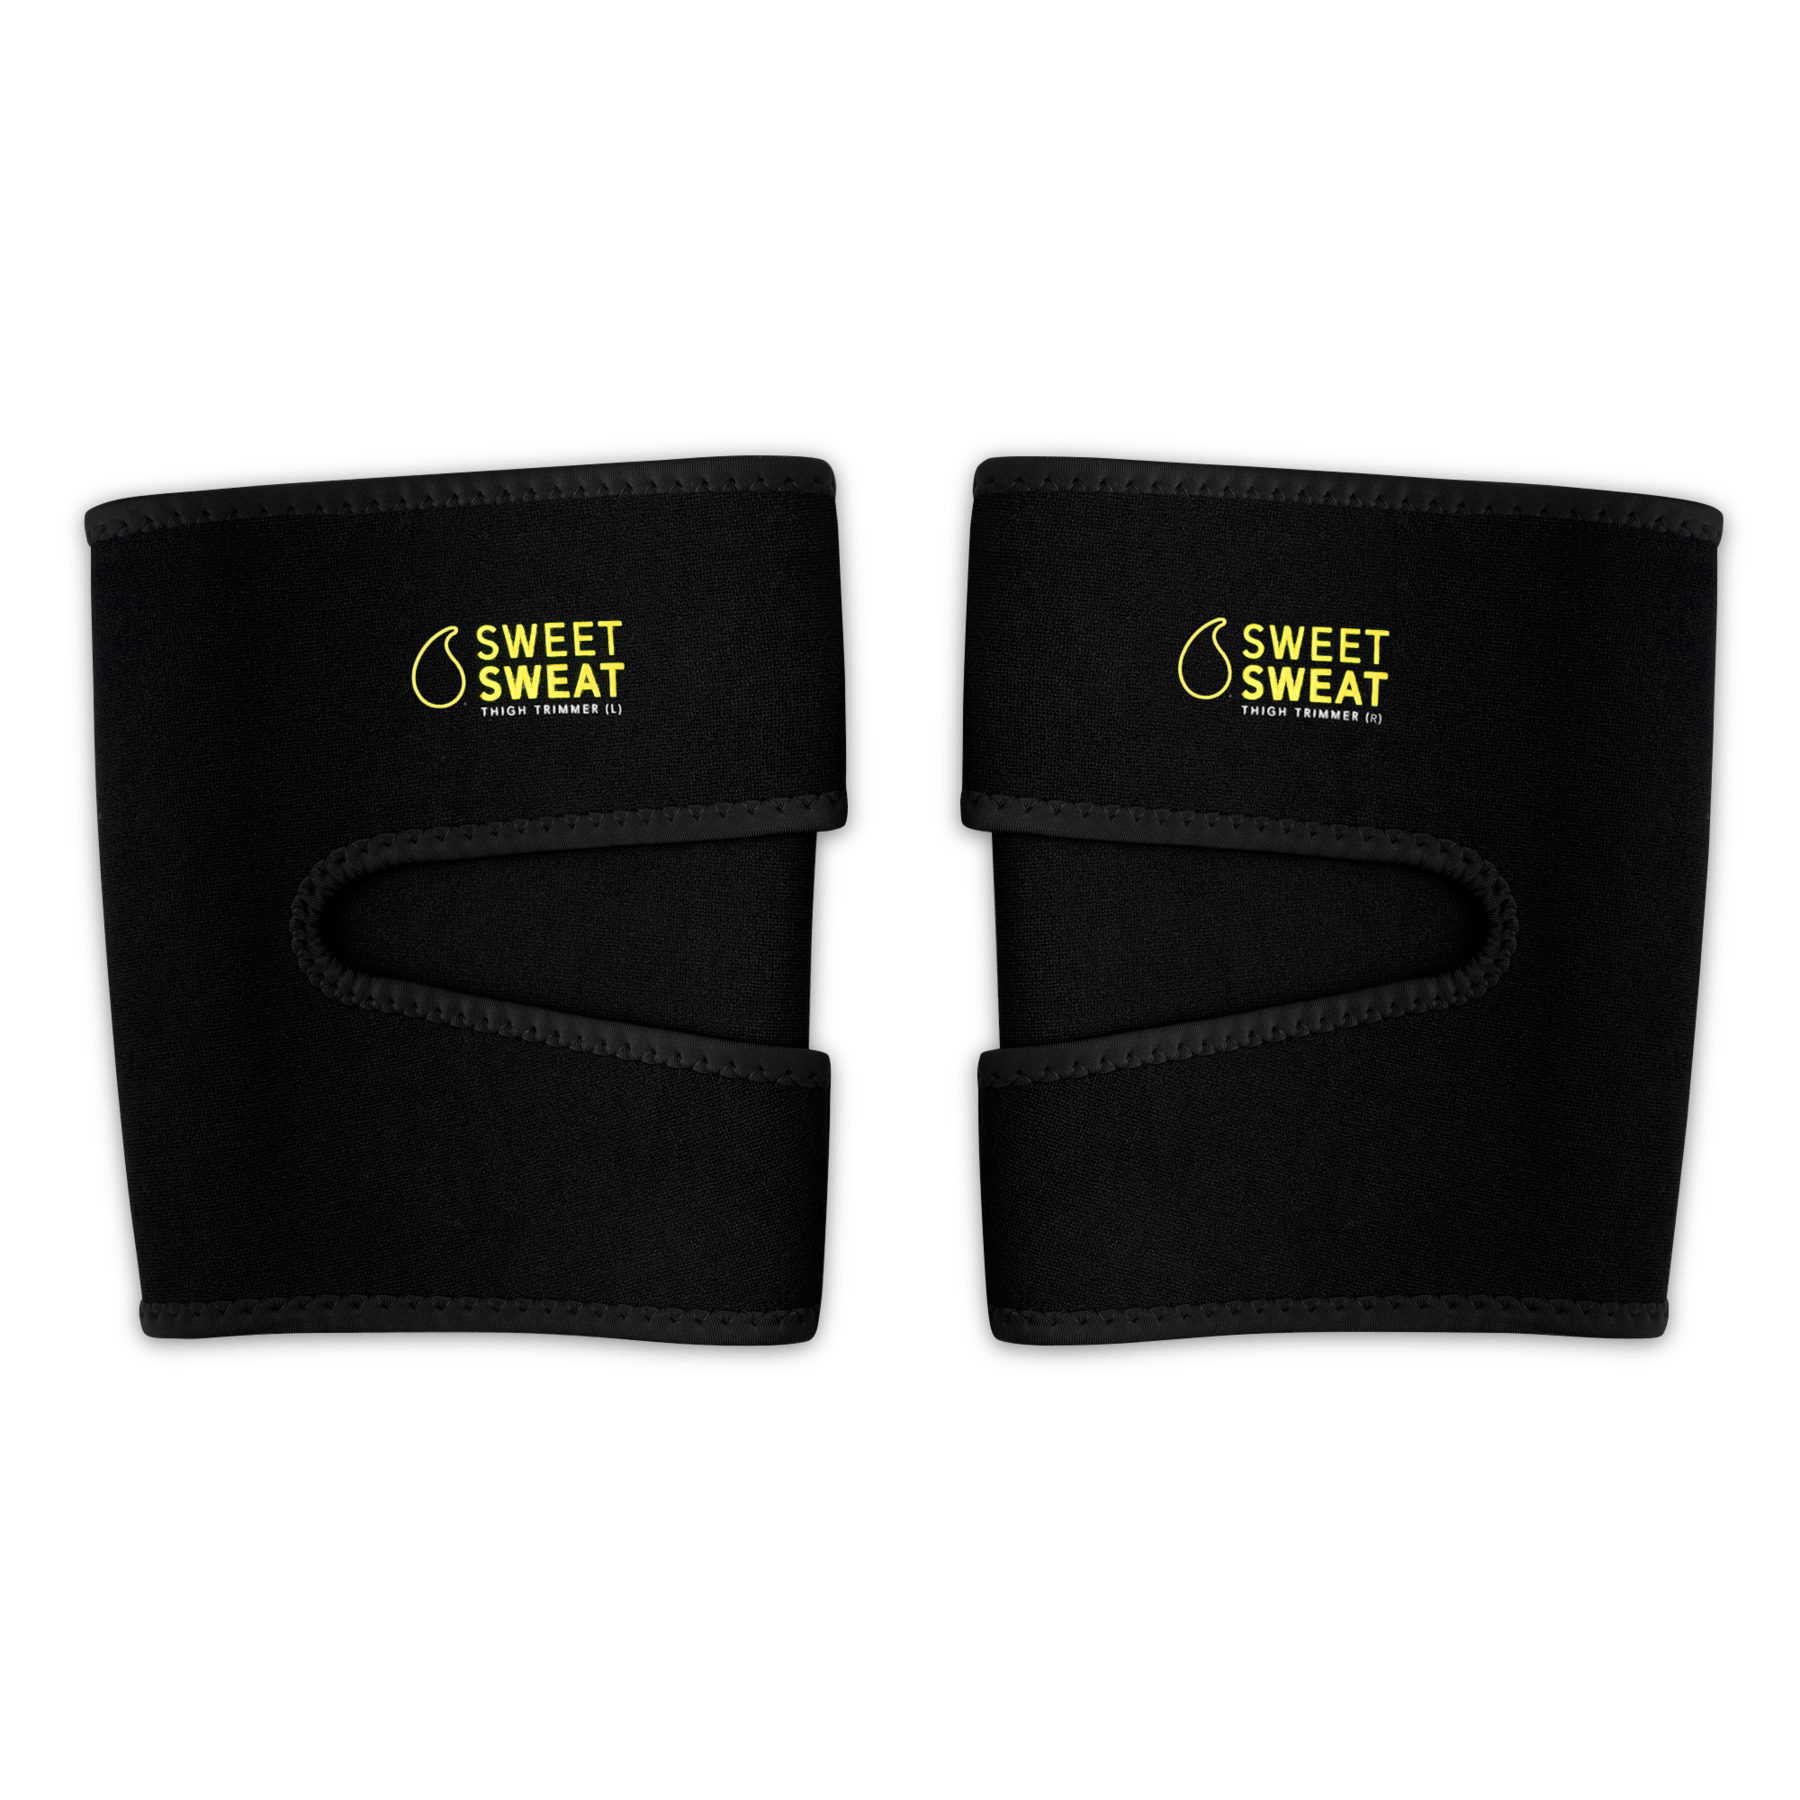 Sweet Sweat Bundle  Buy Waist Trimmer And Workout Enhancer – Sports  Research Australia